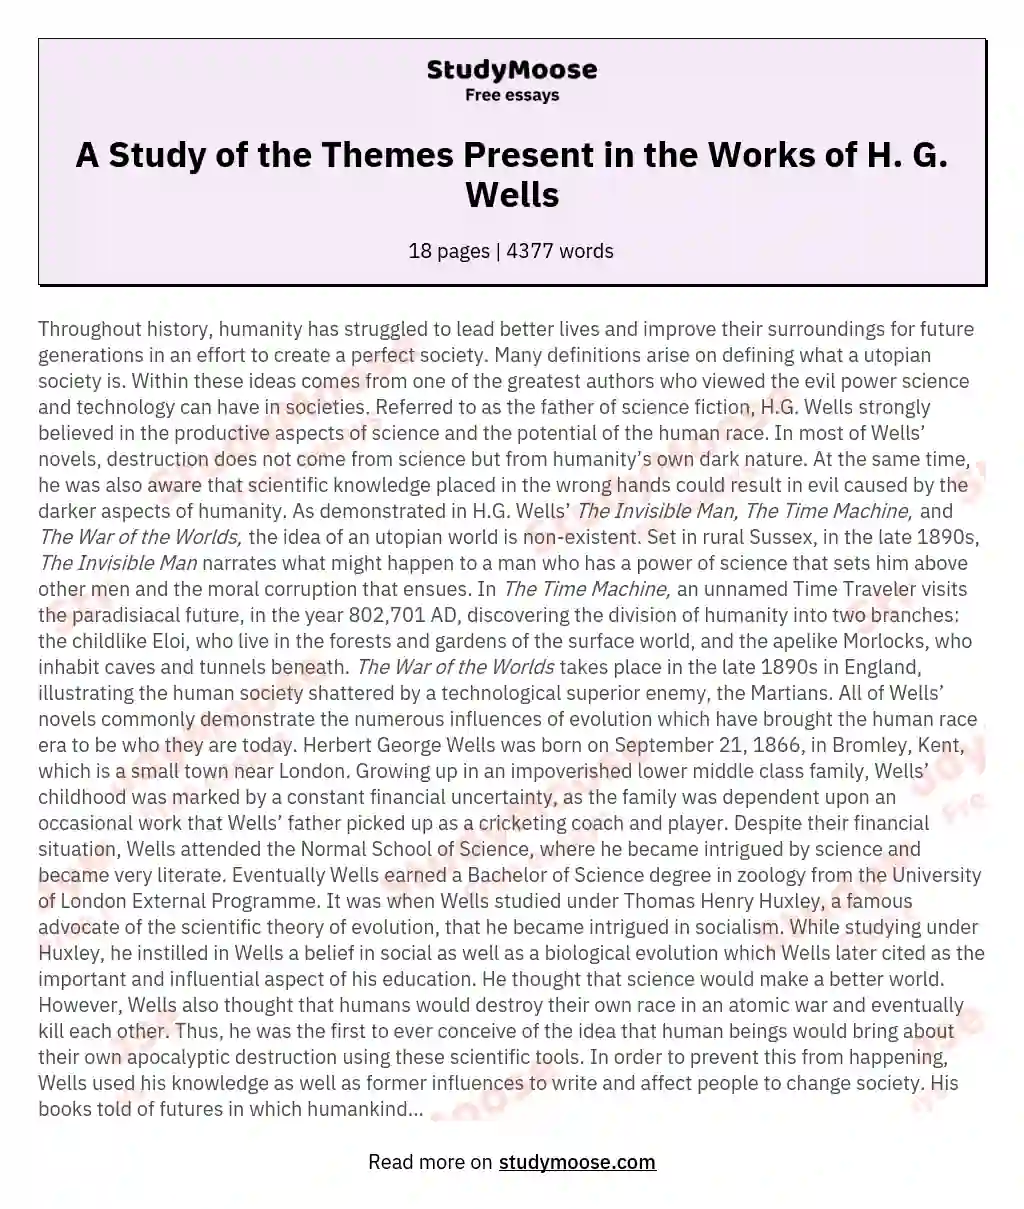 A Study of the Themes Present in the Works of H. G. Wells essay